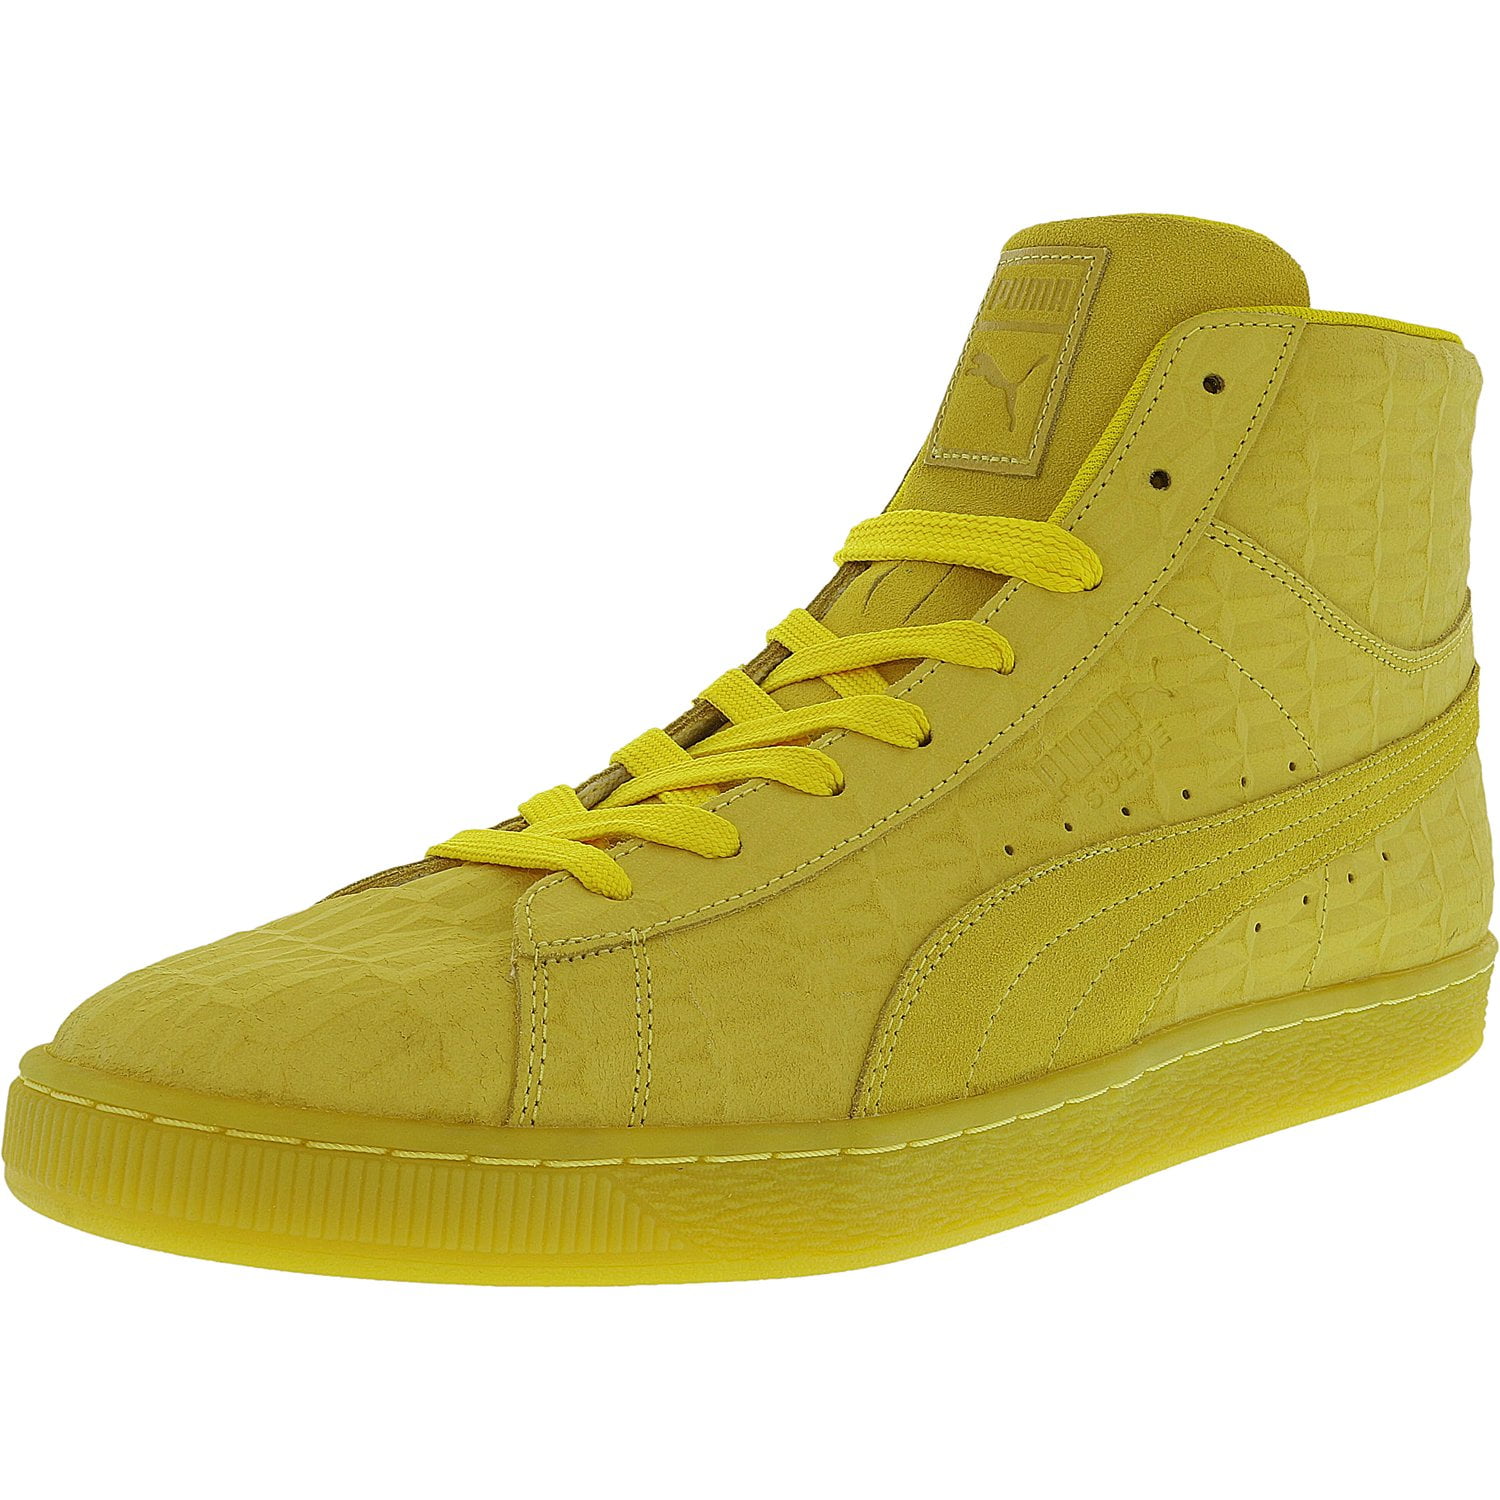 puma men's mid me iced suede fashion sneaker